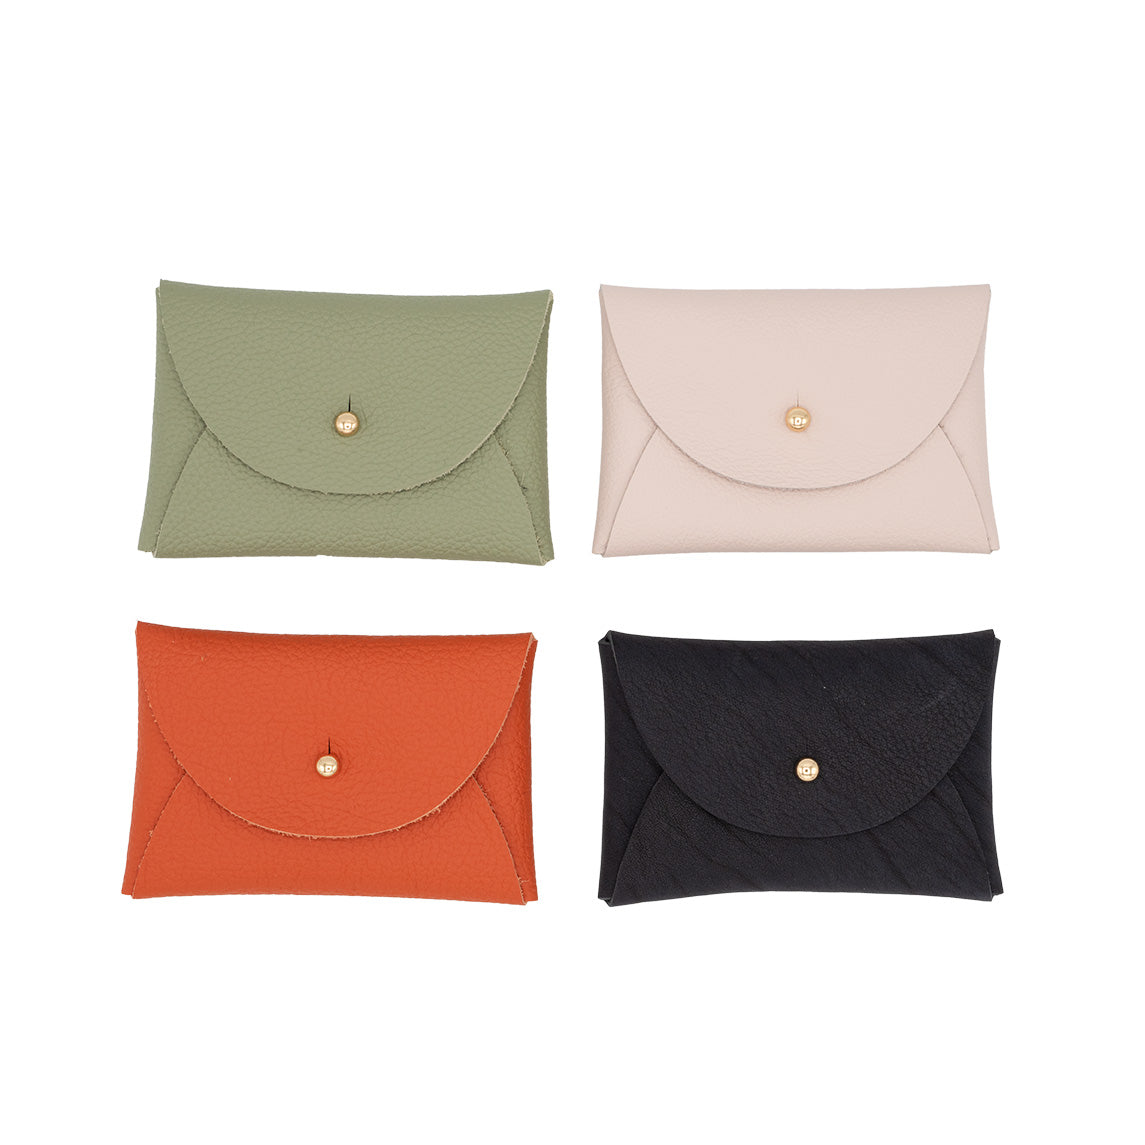 4 rectangular leather purses placed in a grid of four. In colours sage green, orange, pale pink and navy.